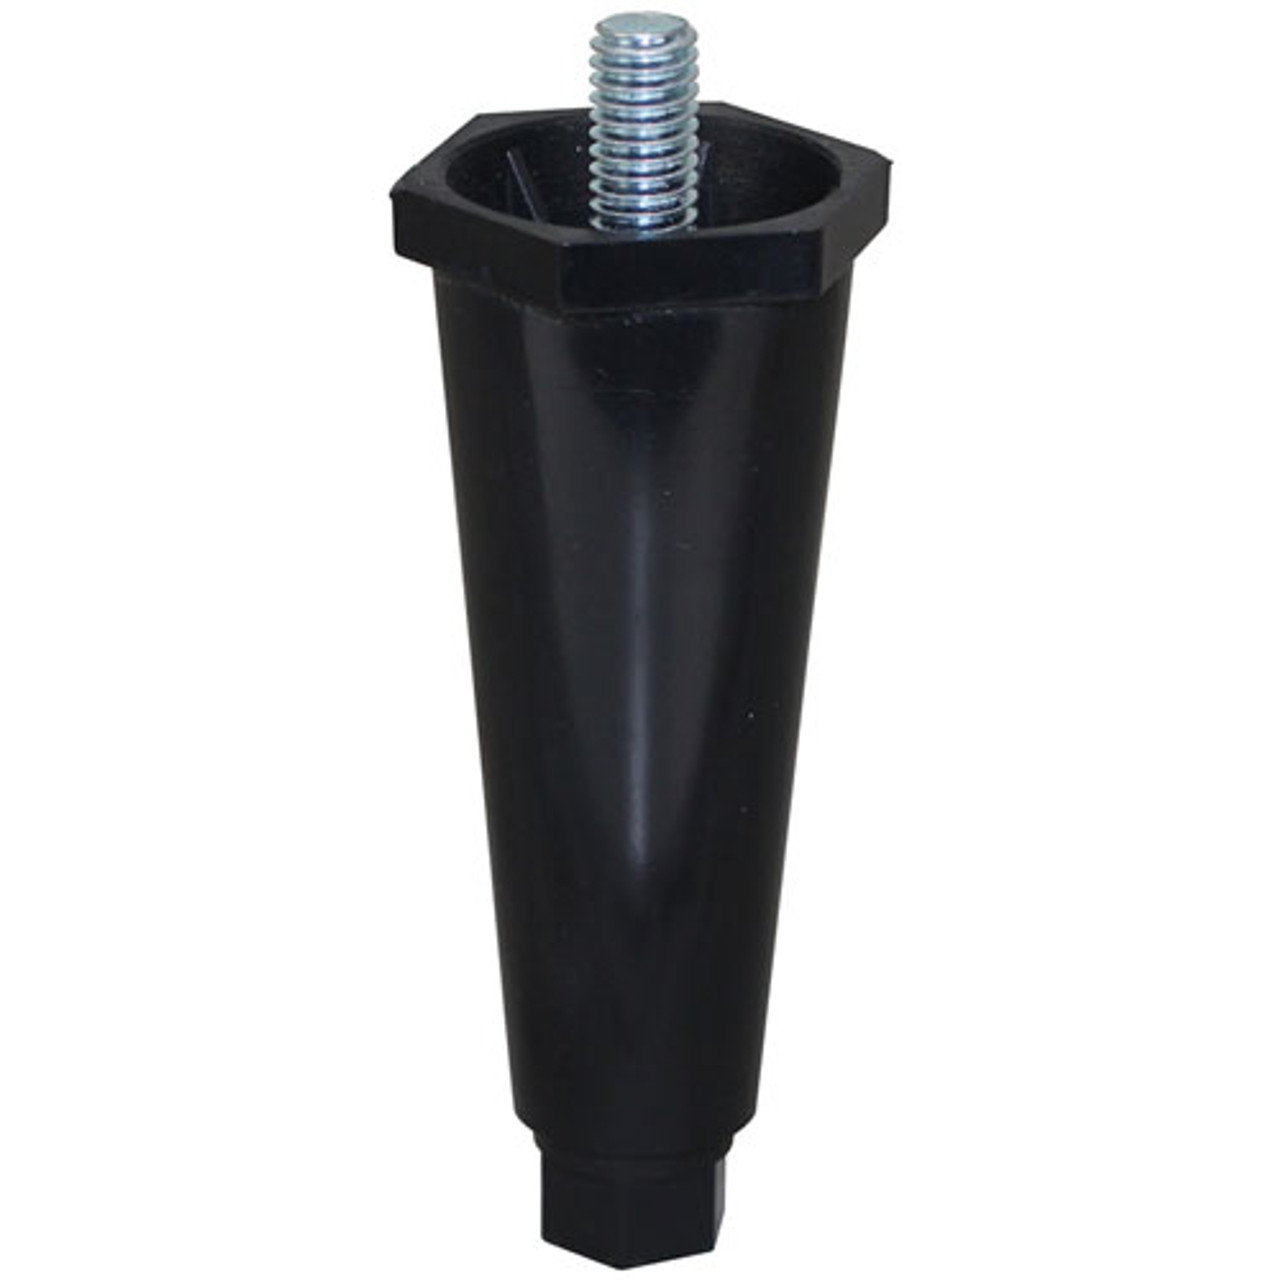 Leg 4H 3/8-16 - Replacement Part For Hatco HT5-30-007